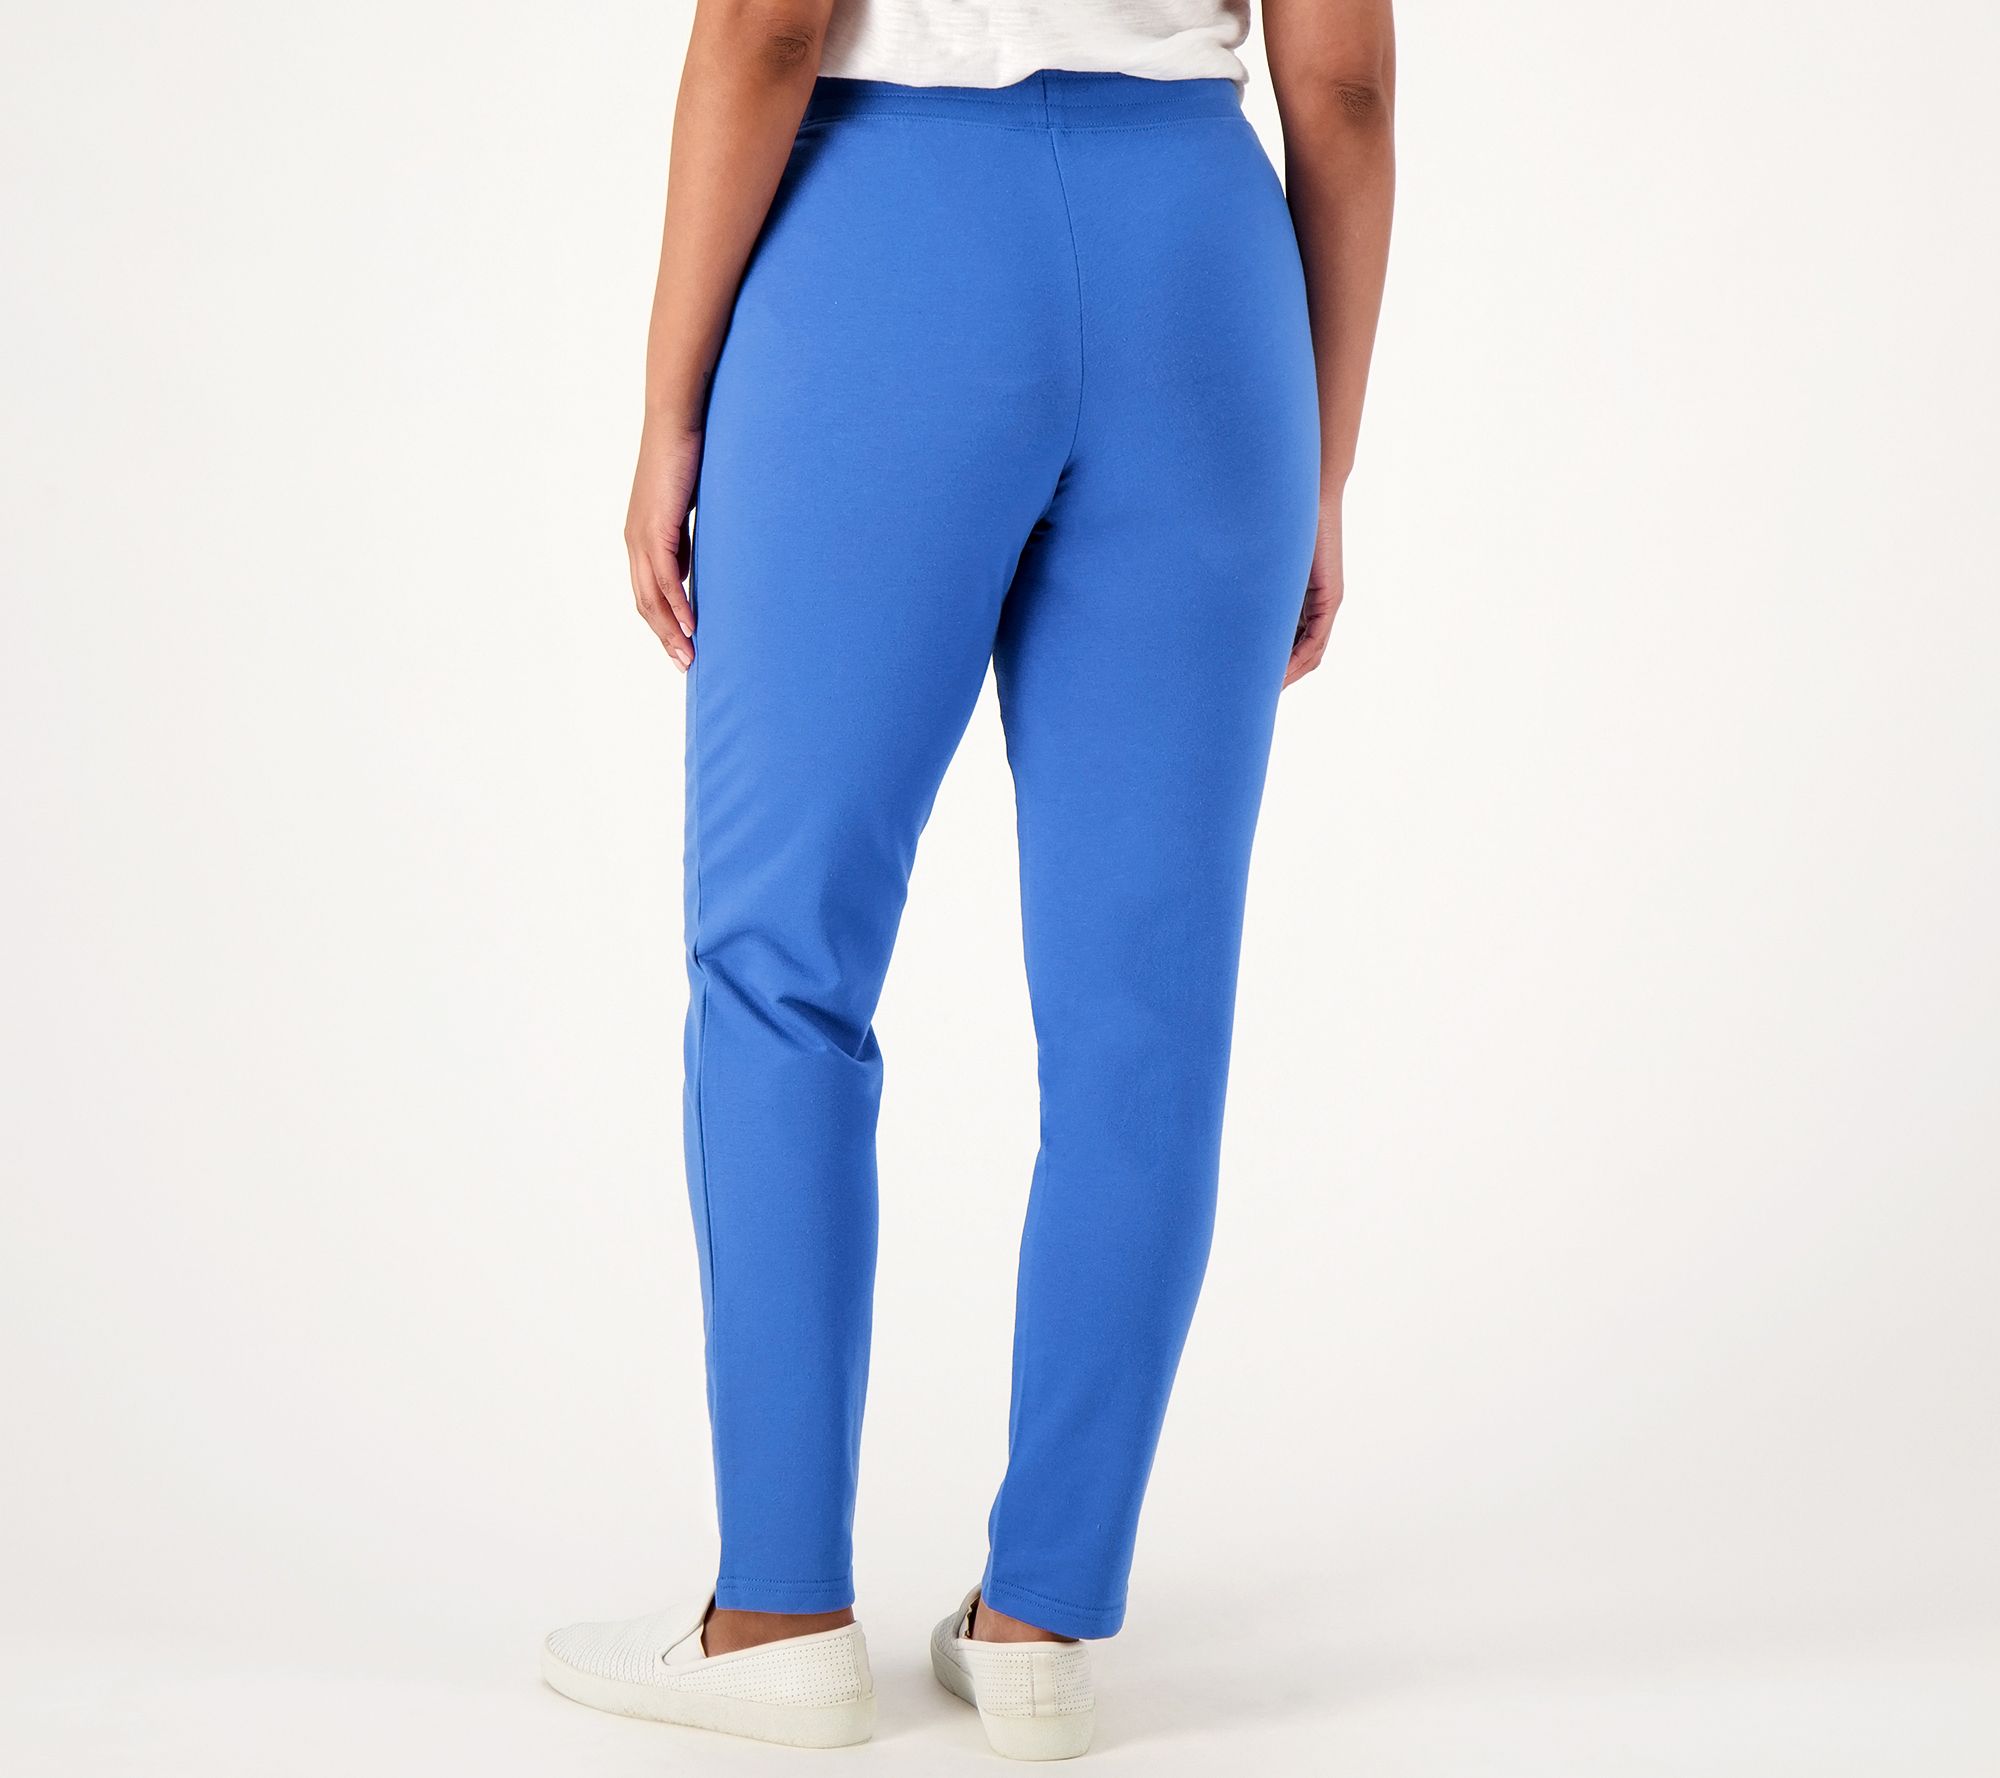 Sport Savvy French Terry Slim Straight Pull On Pant - QVC.com